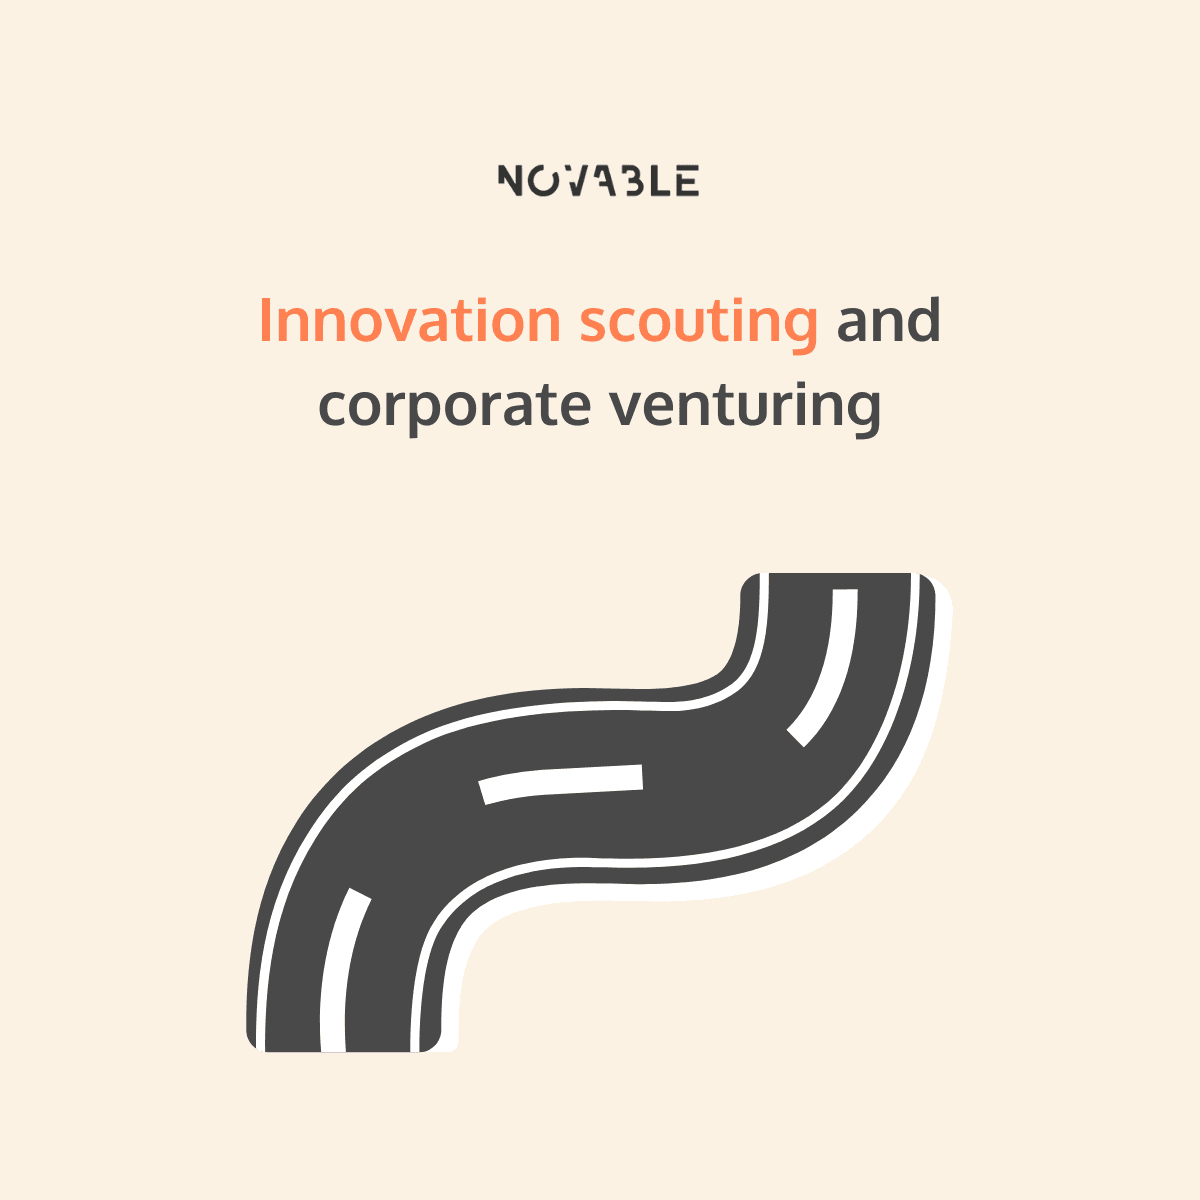 5 Takeaways From Innovation Scouting and Corporate Venturing Webinar